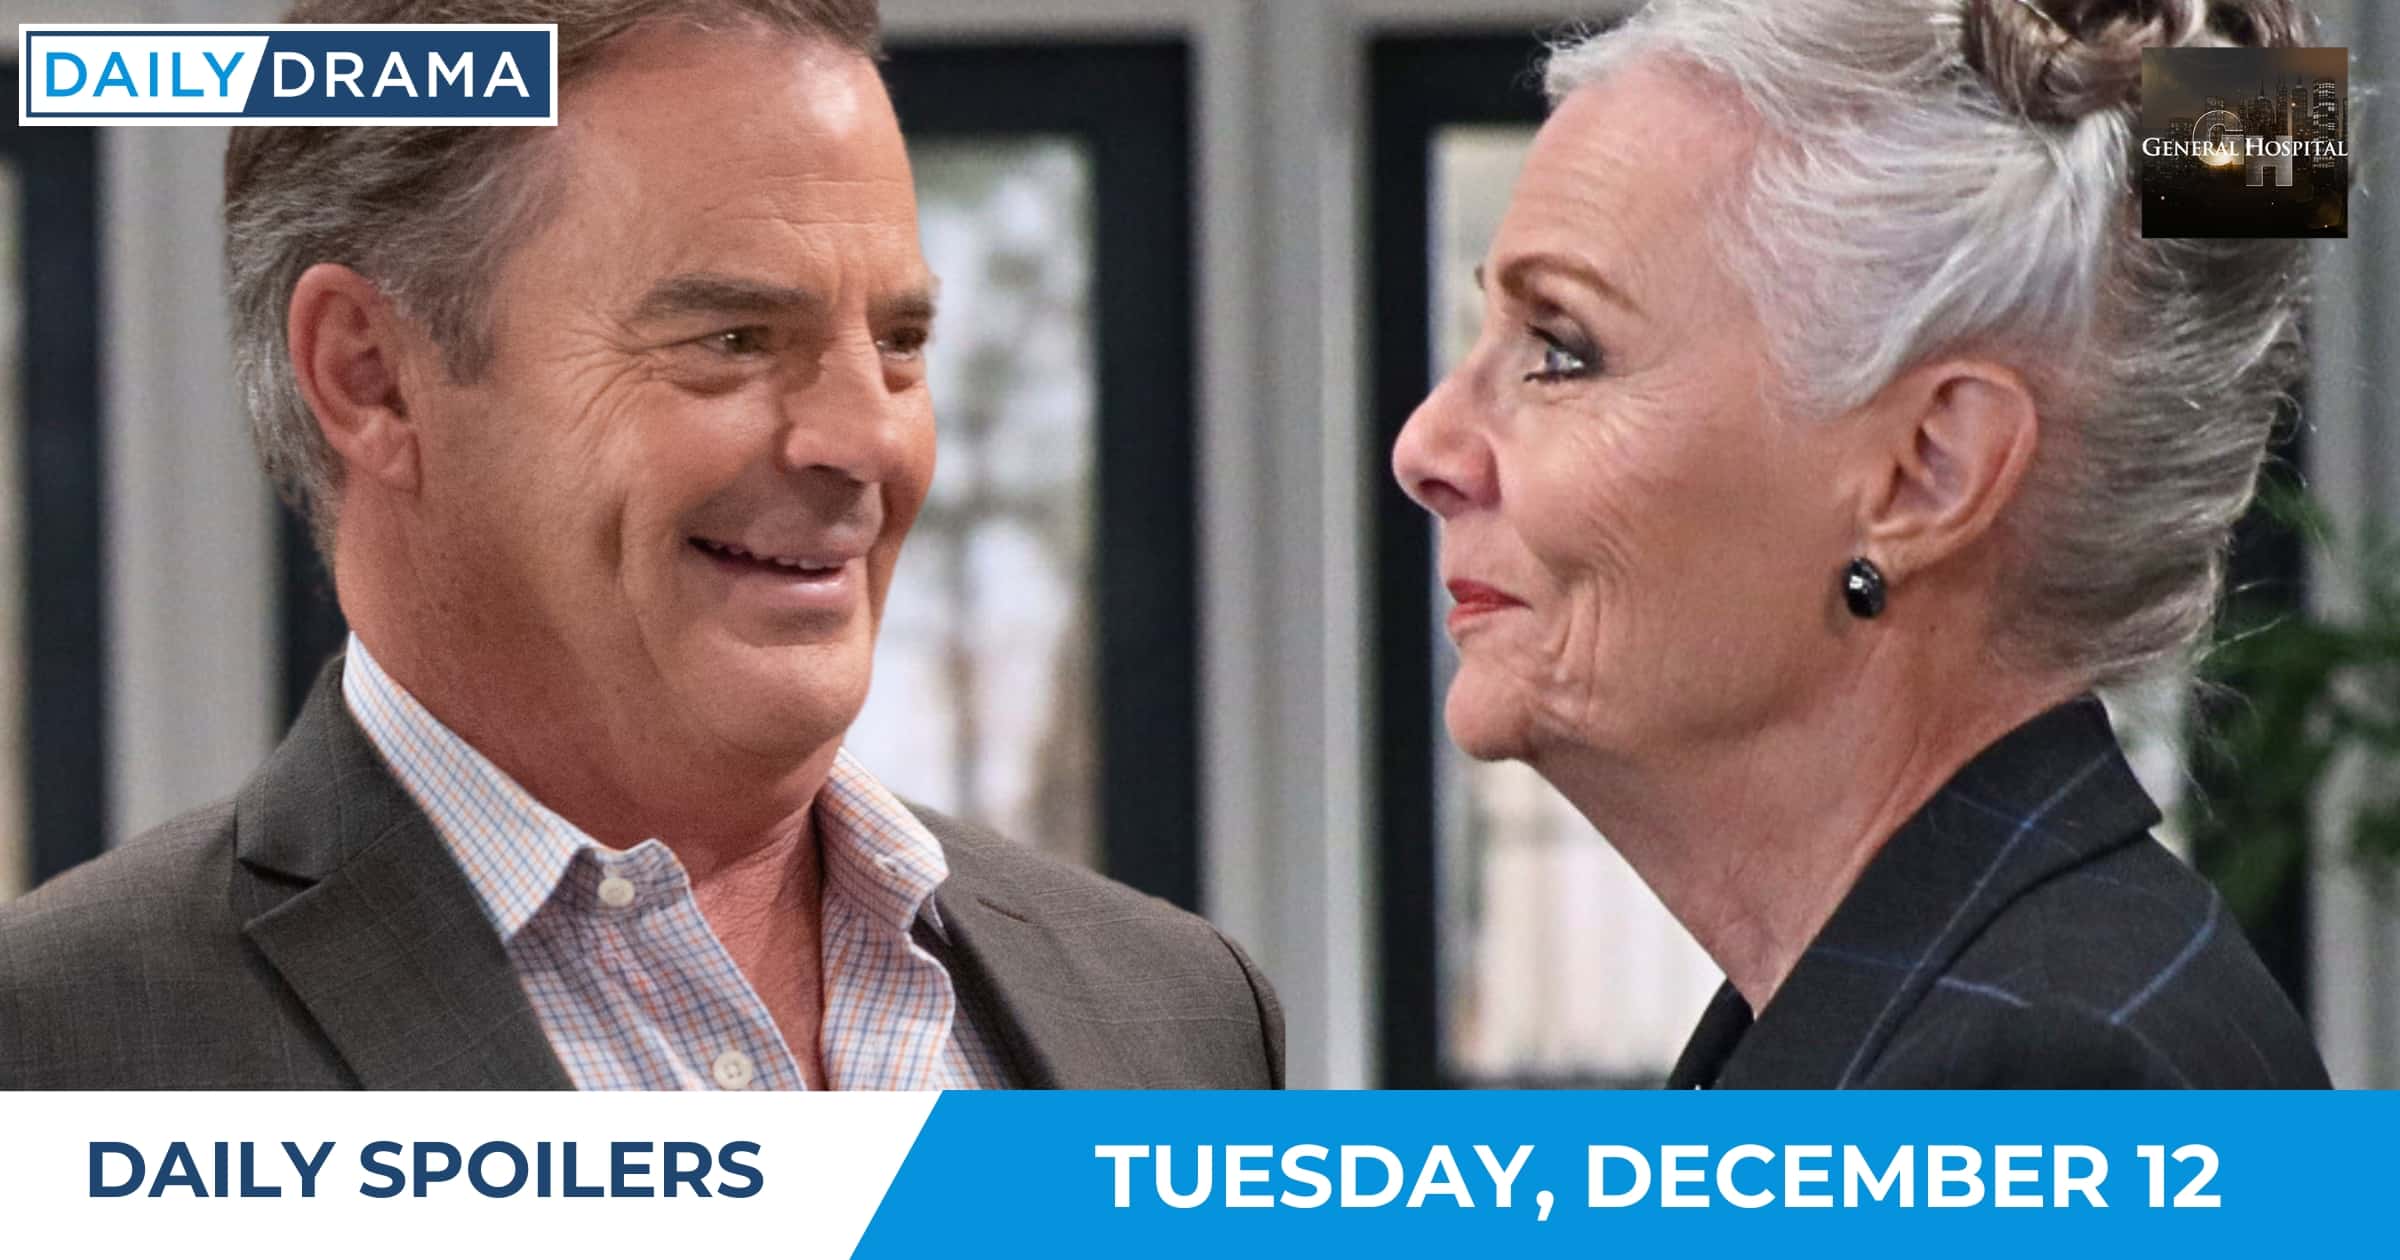 General Hospital Daily Spoilers - Dec 12 - Ned and Tracy